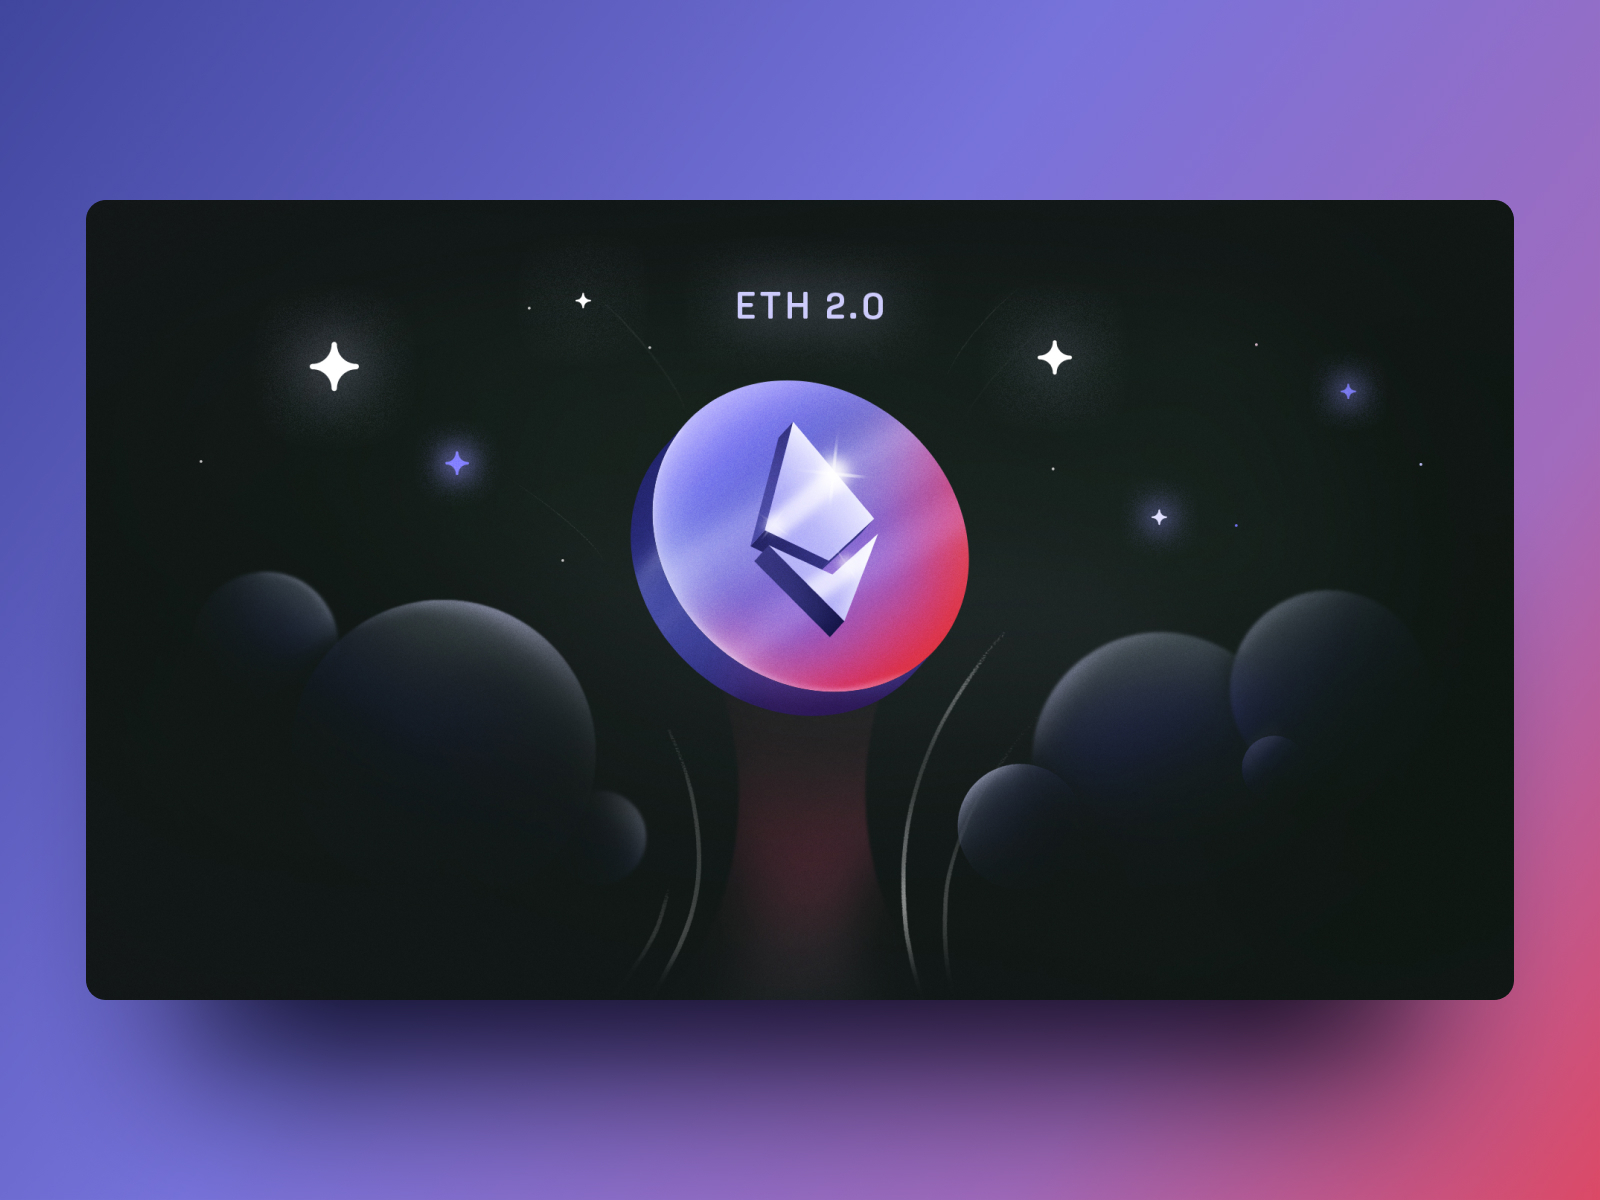 Dispatch - Ethereum 2.0 abstract adobe banking coin cosmos crypto crypto wallet cryptocoin cryptocurrency digital assets eth ethereum finance fintech futurism graphic design illustration illustrator nexo stars